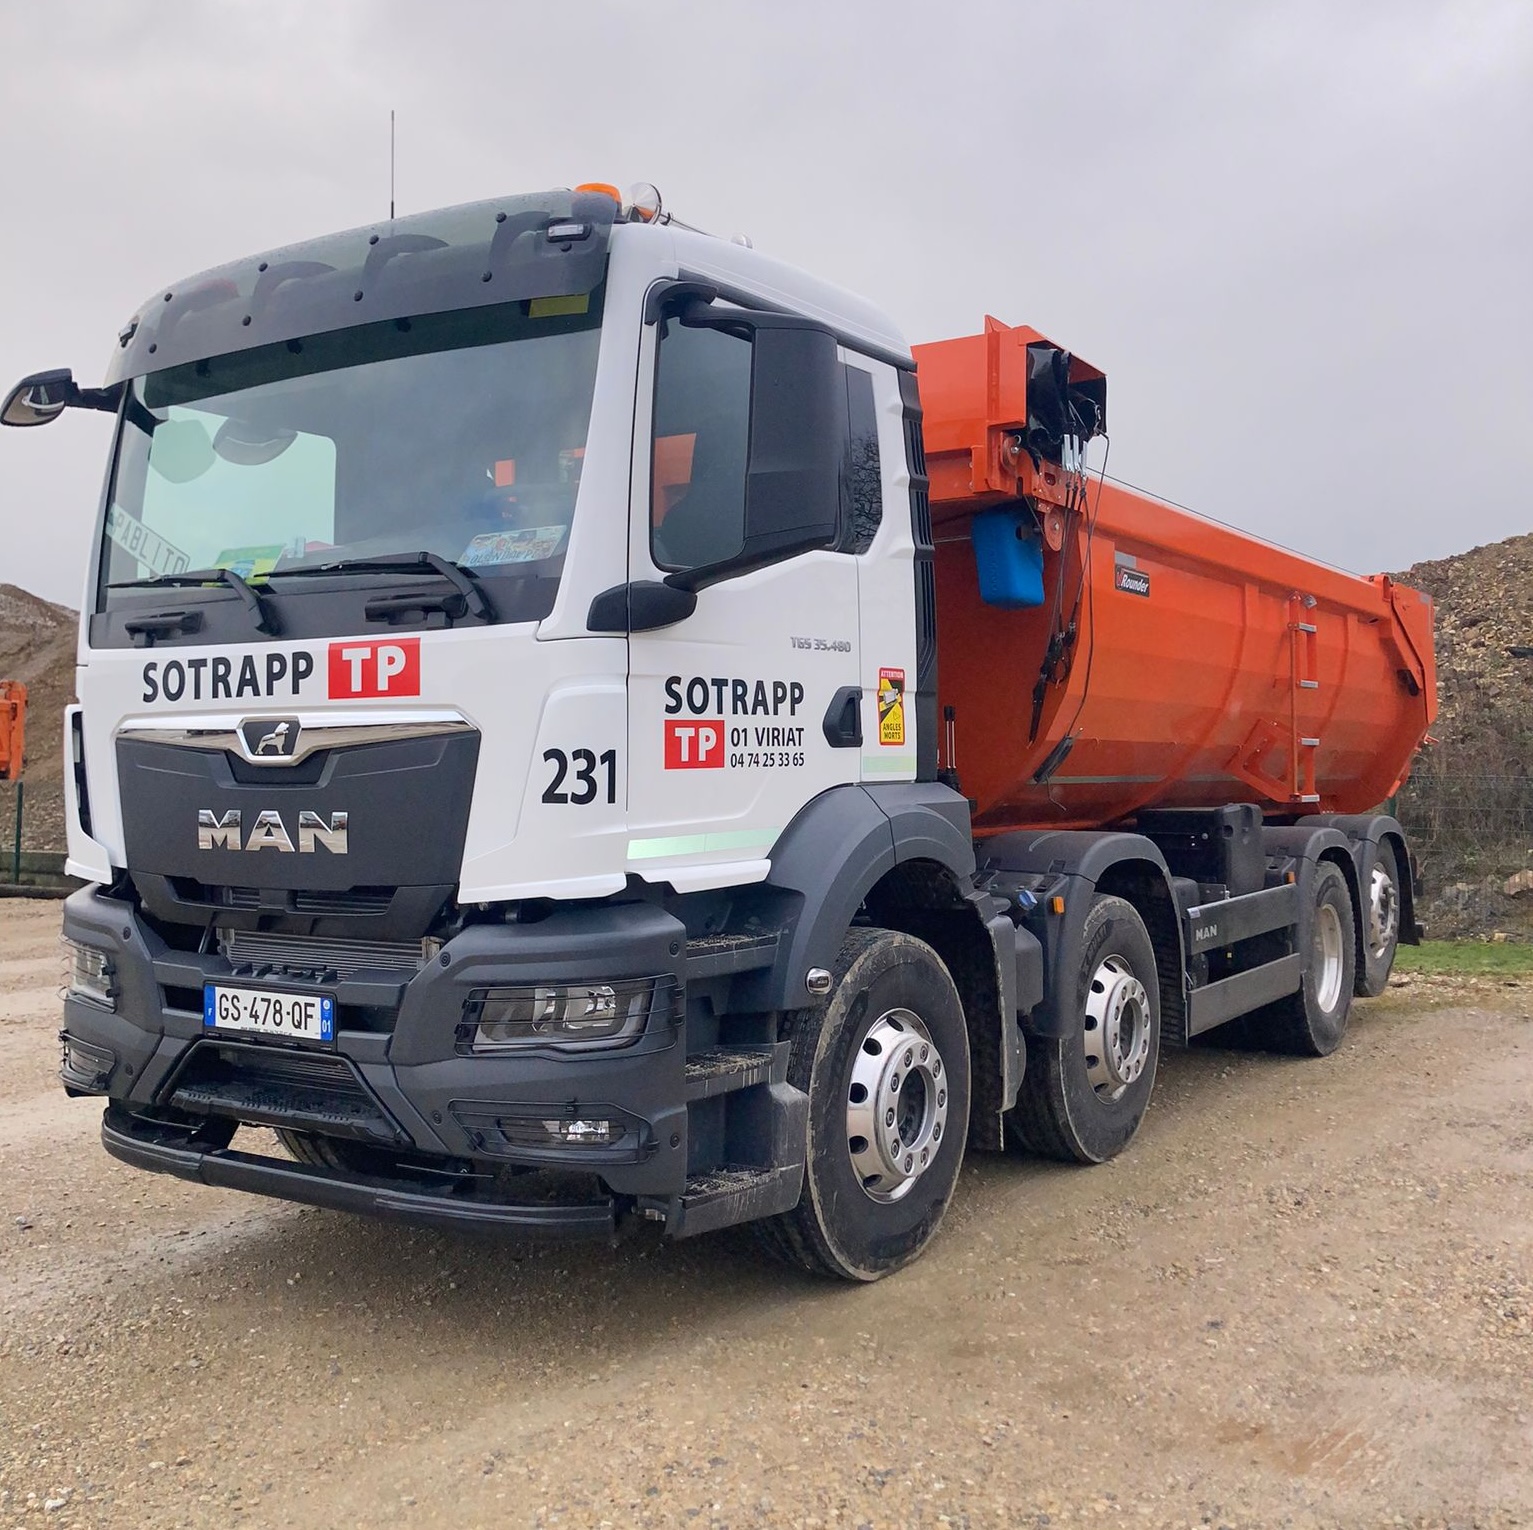 Sotrapp TP invests in a new MAN 8X2